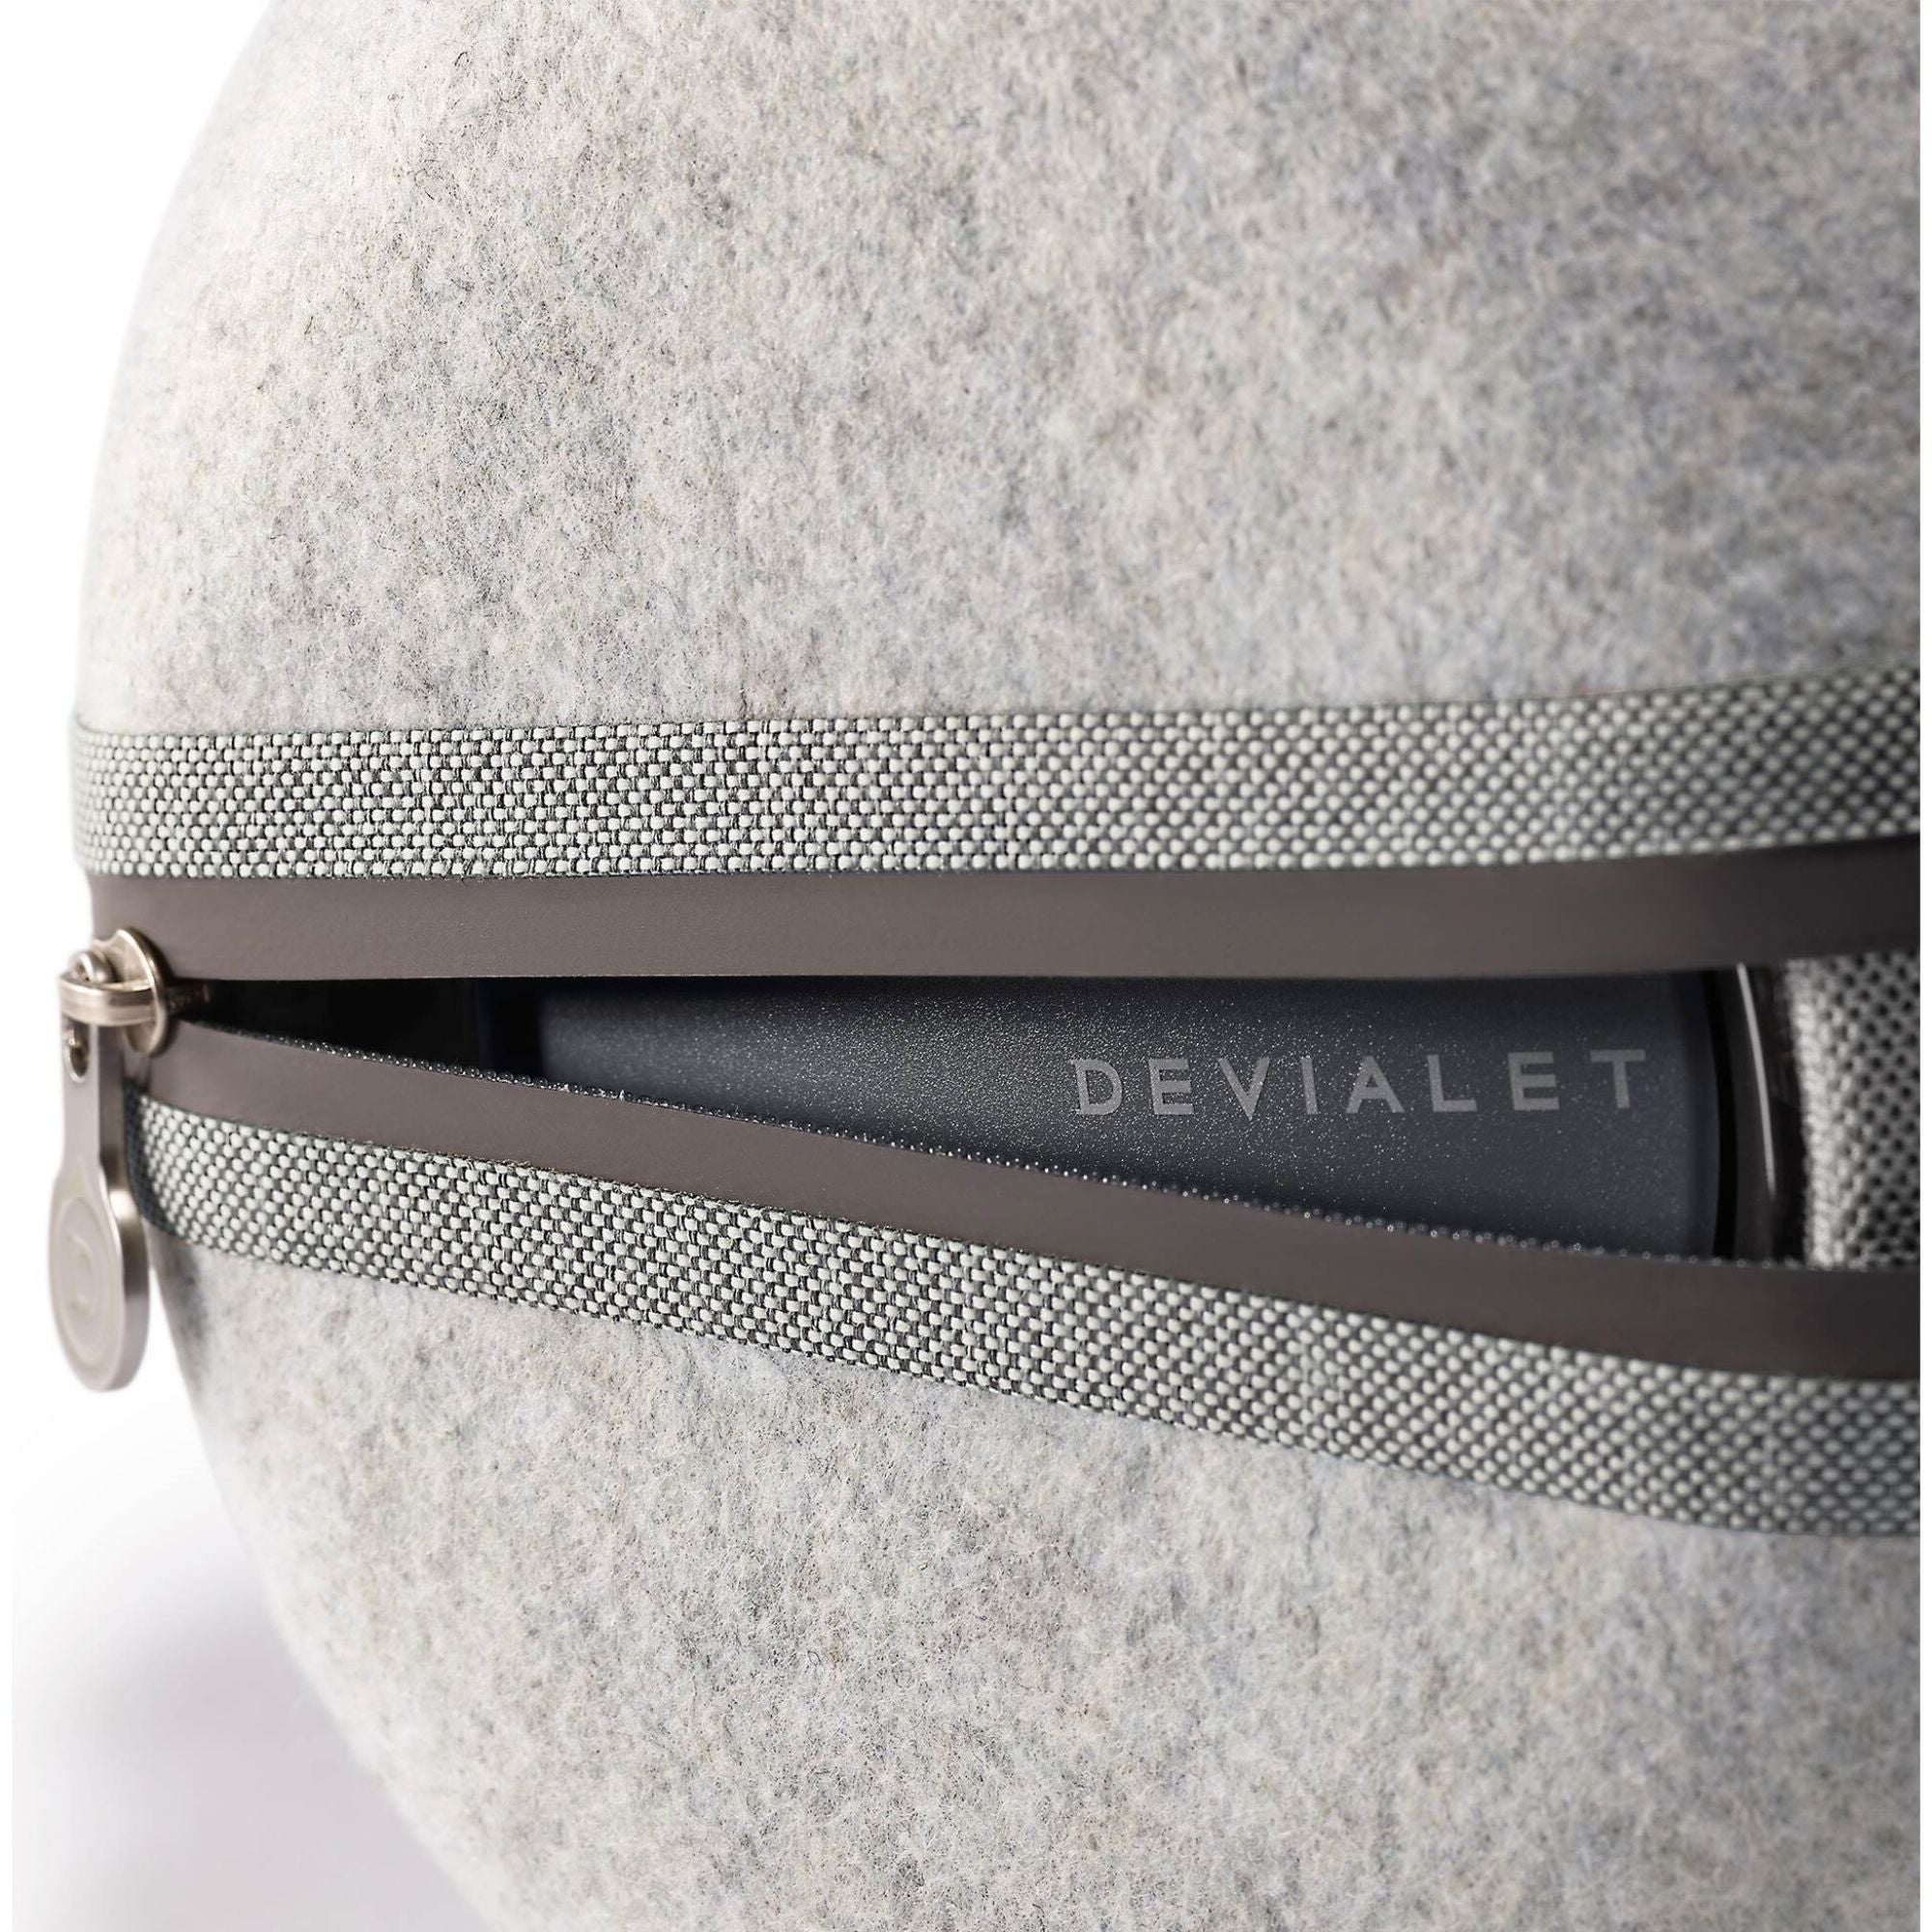 Devialet Mania Cocoon - Carrying Case, Devialet, carring bag - AVStore.in